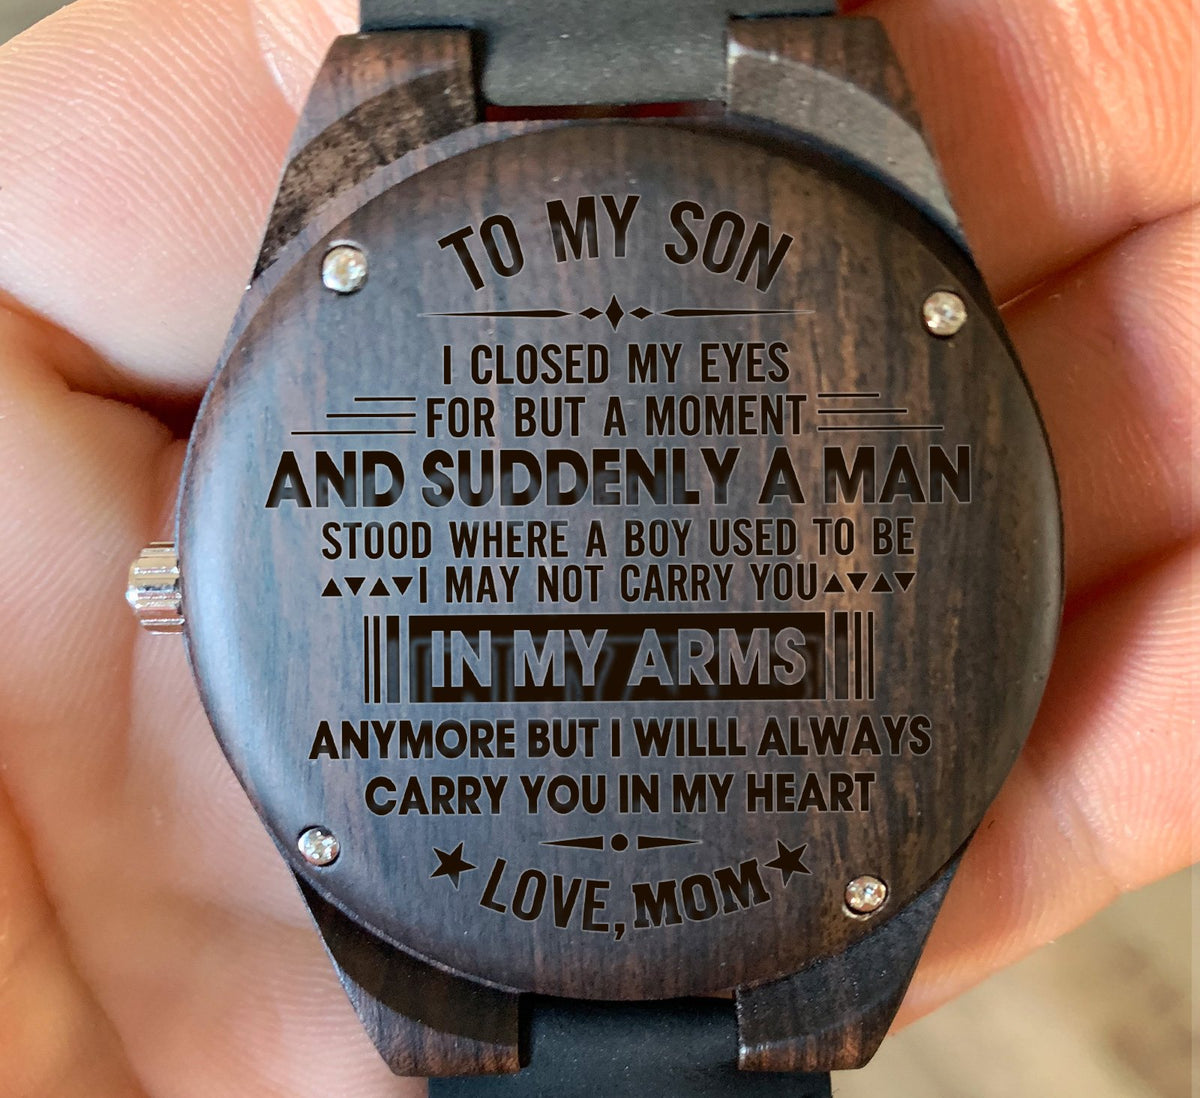 To My Son - I May Not Carry You in My Arms Anymore But I Will Always Carry You in My Heart - Wooden Watch